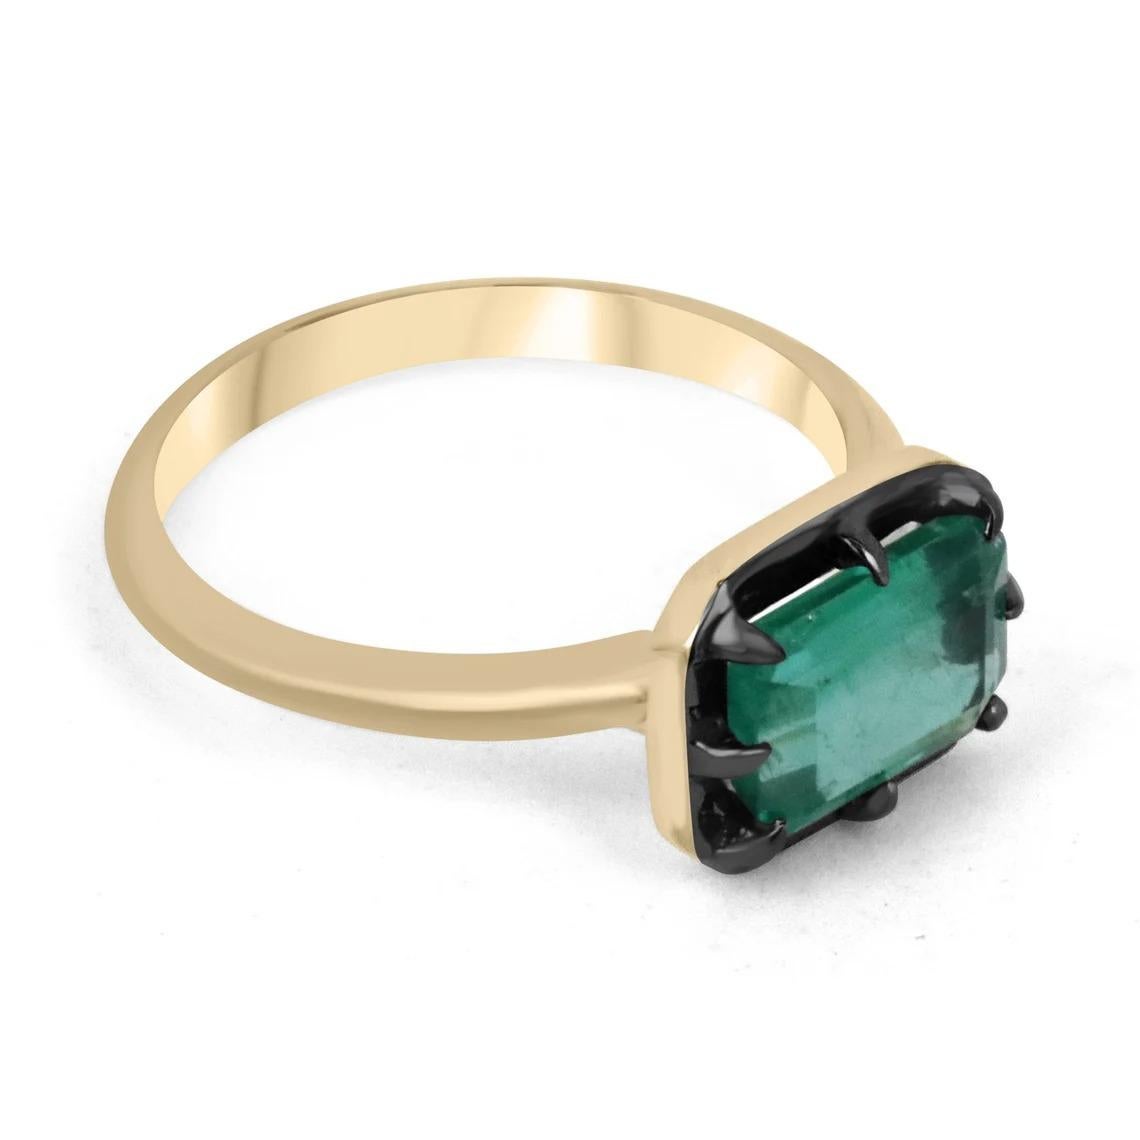 Displayed is a one-of-a-kind, natural emerald solitaire emerald-cut engagement ring/right-hand ring in 14K yellow gold, with a black rhodium rim over the bezel. This gorgeous solitaire ring carries a full 1.85-carat Zambian emerald in an eight-prong